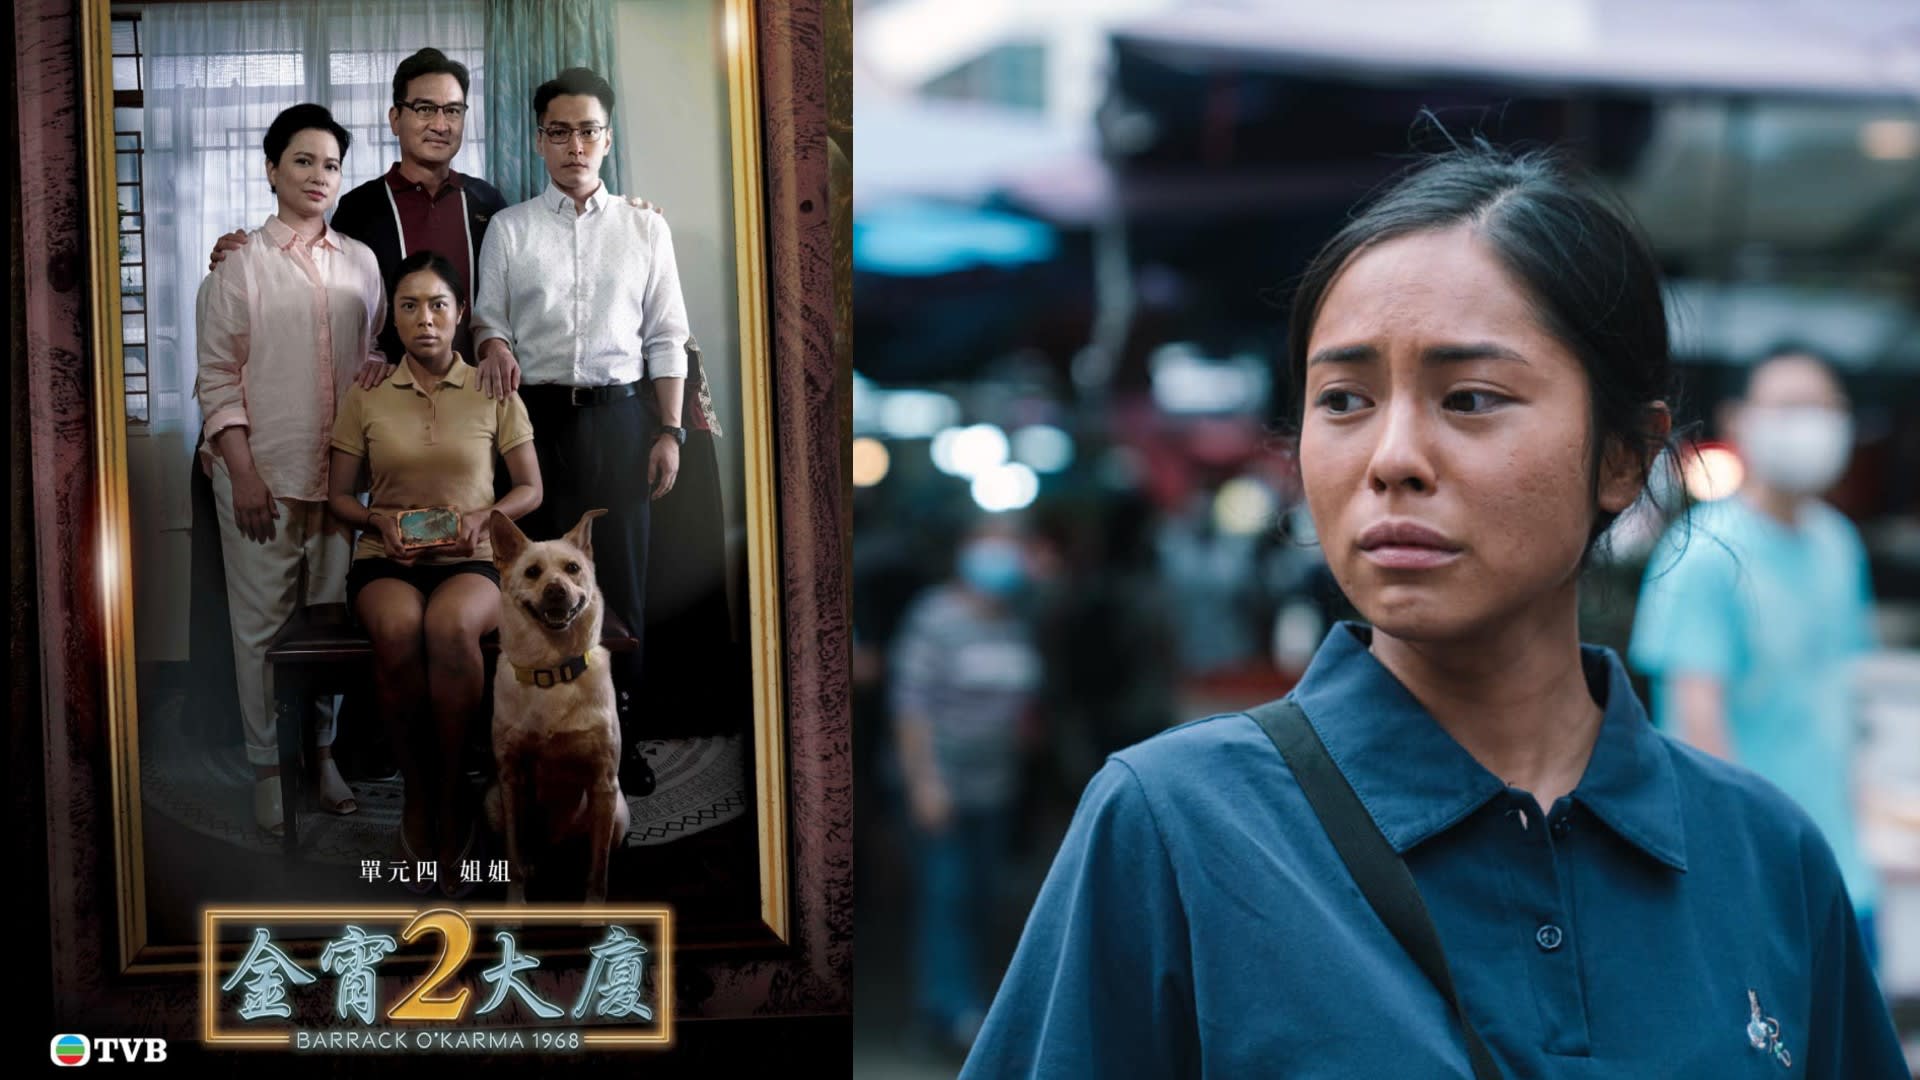 TVB Drama Barrack O’Karma 1968 Under Fire For Putting Chinese Actress In Brownface To Portray  Filipino Domestic Helper